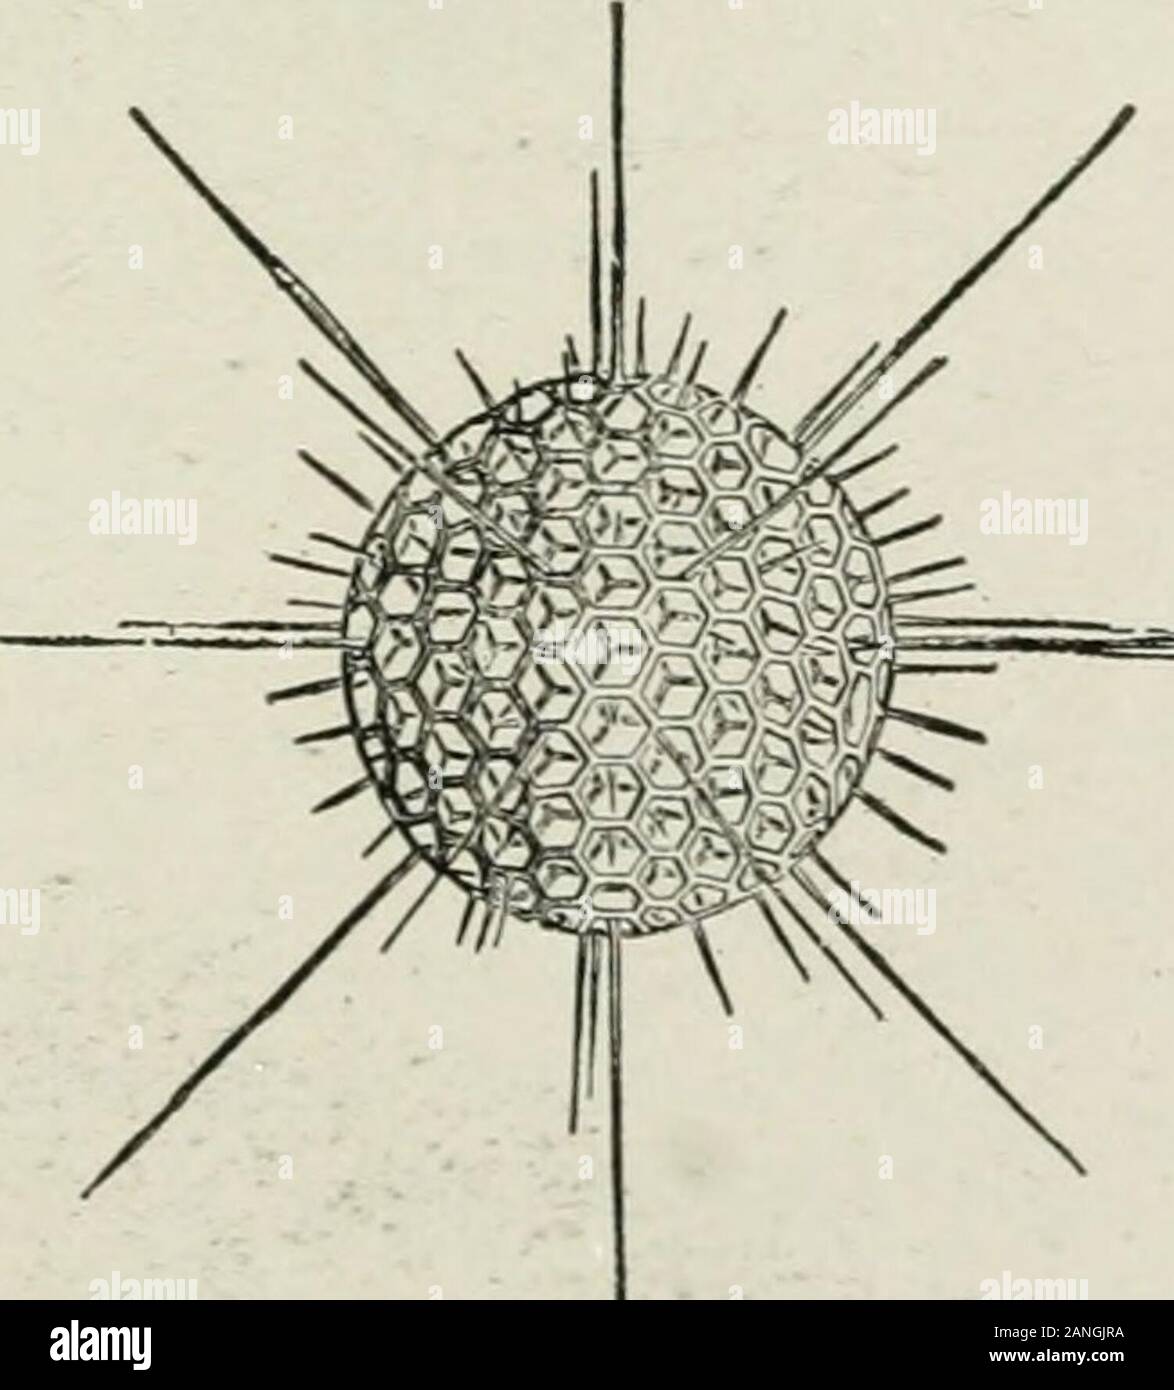 Beginners' zoology . Change shape in anarrow passage ? Does refuse fig. 19.—shell of a radiolarian. Fig. 17. — VoRTi-cella (or bellanimalcule), twoextended, onewithdrawn. Fig. 18.—Euglena.. i6 BEGINNERS ZOOLOGY matter leave the body at any particular place ? Tracemovement of the food particles. Draw the paramecium. Which has more permanent parts, the amoeba or Para-mecium ? Name two anatomical similarities and three dif-ferences; four functional similarities and three differences. The amoeba belongs in the class of protozoans calledRhizopoda root footed. Other classes of Protozoans are the Inf Stock Photo